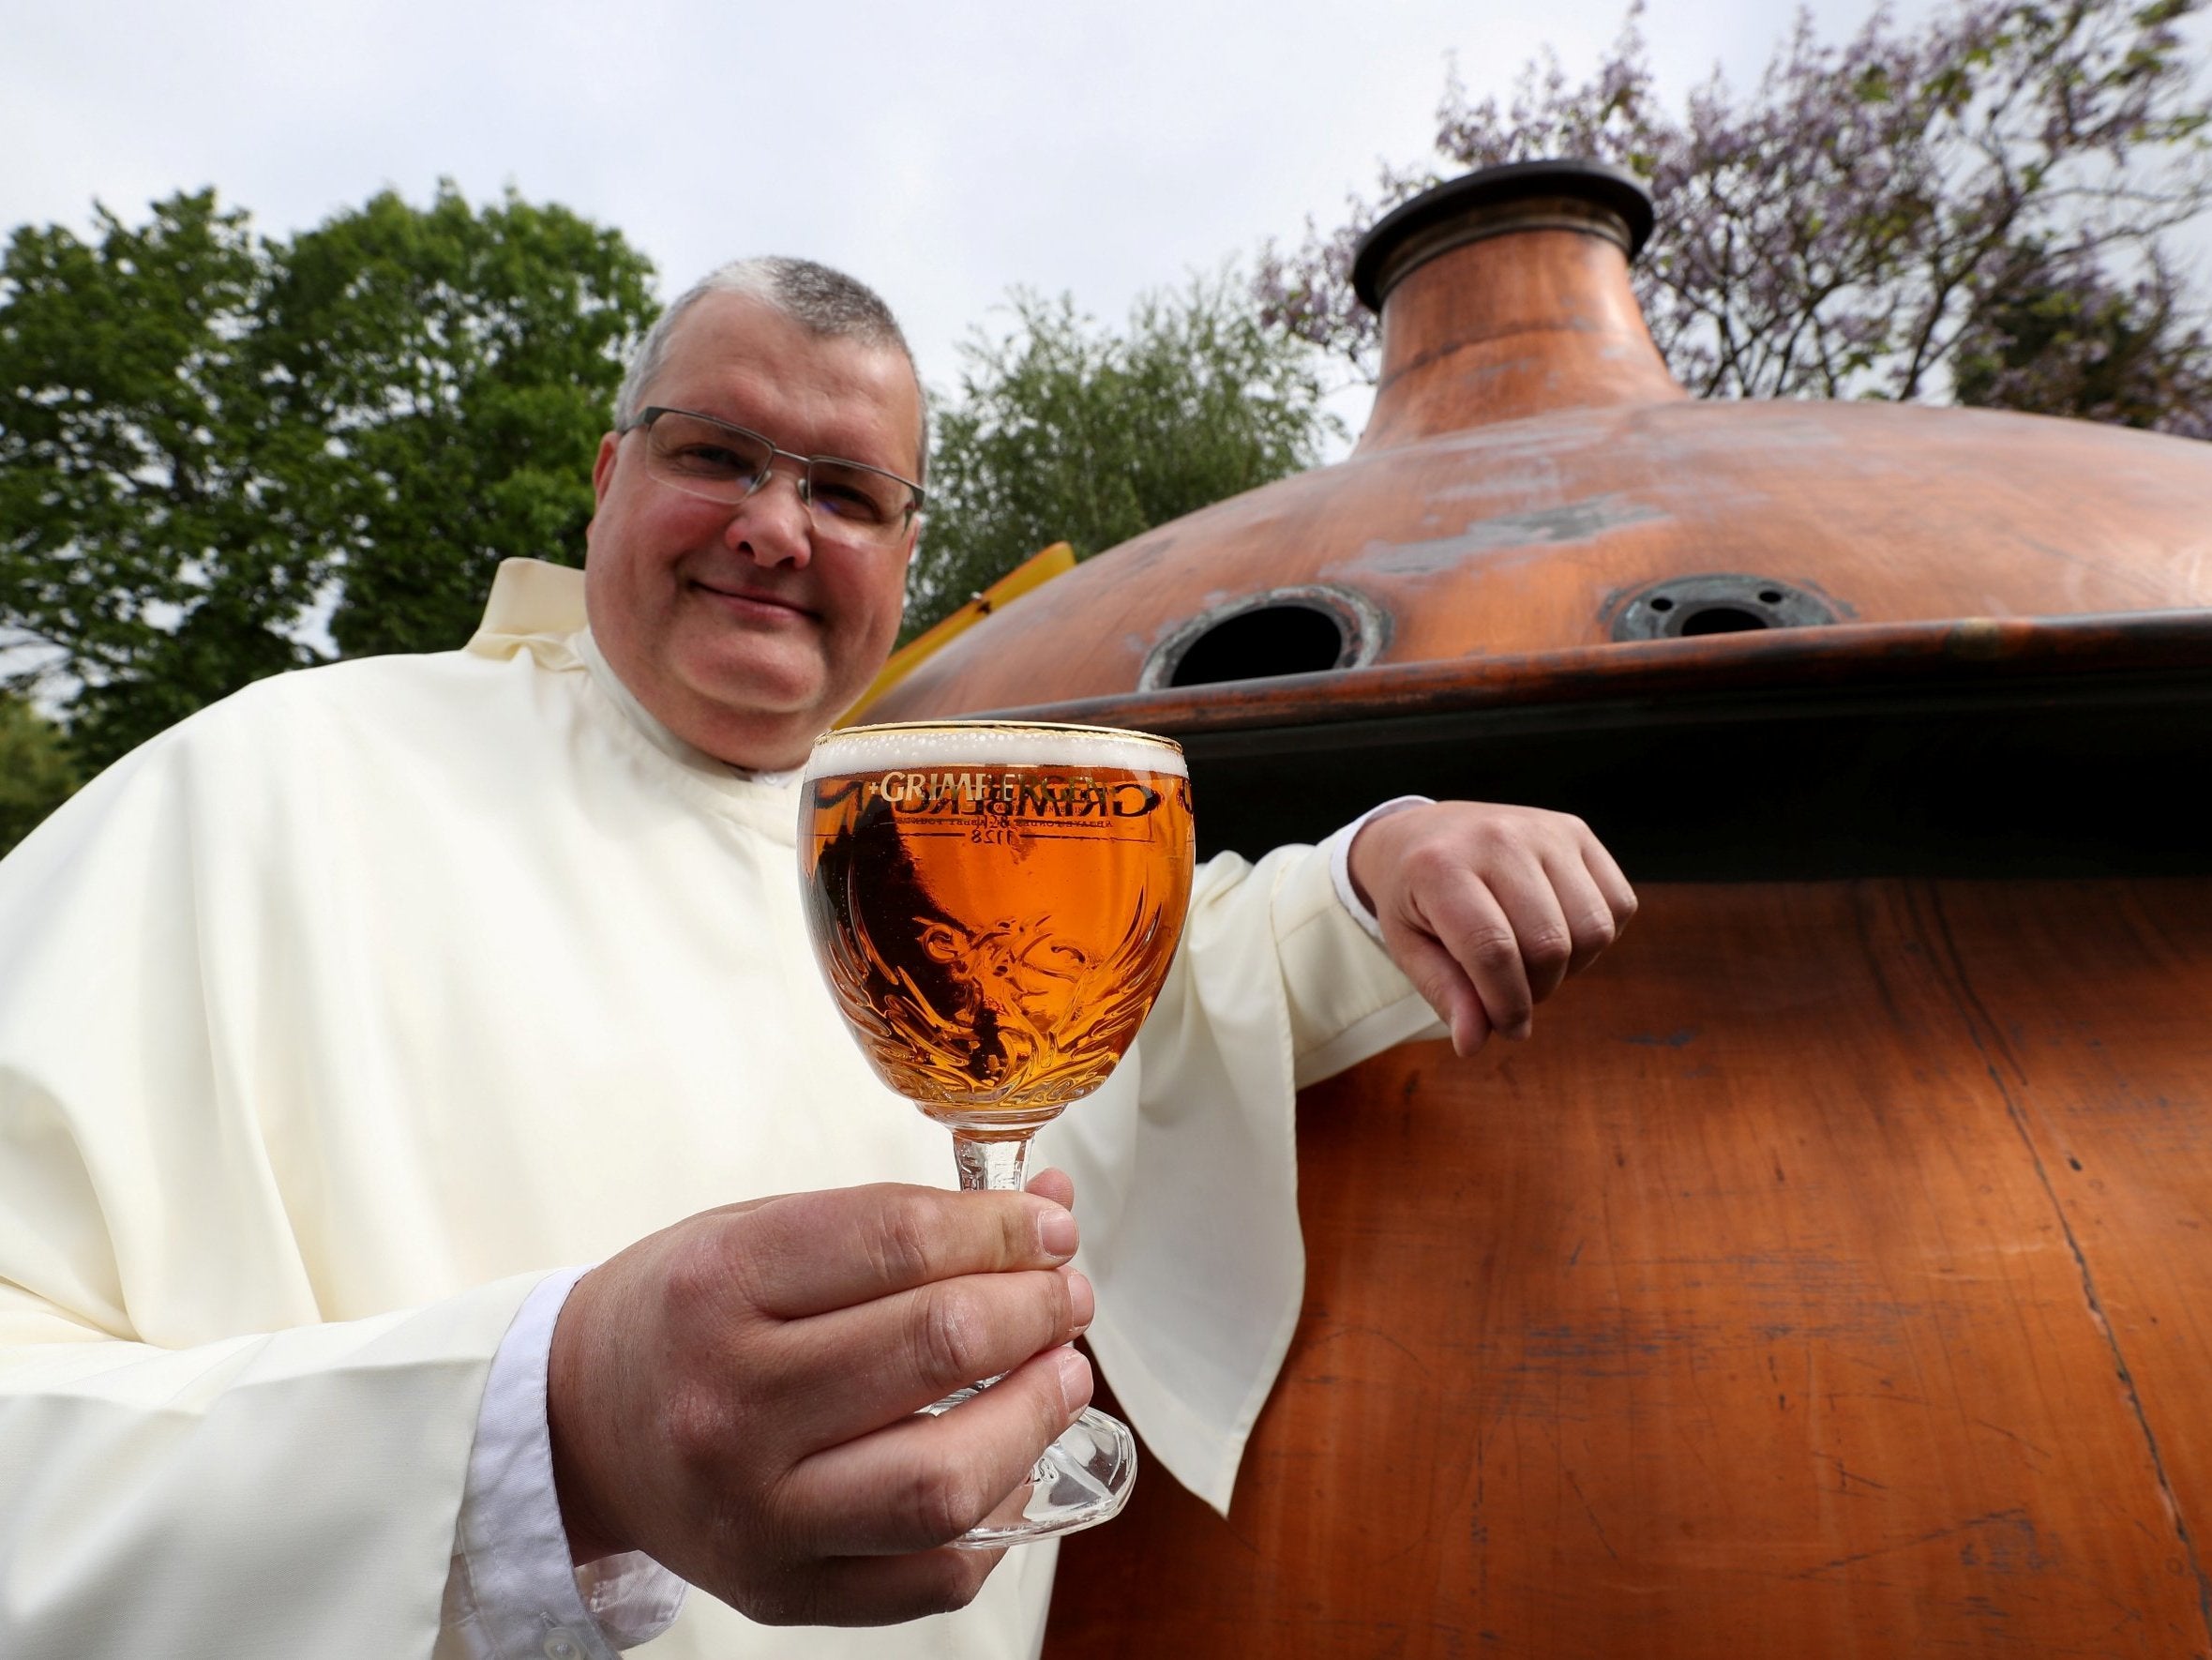 Norbertine Father Karel poses with a Grimbergen beer in the courtyard of the Grimbergen Abbey in Belgium.